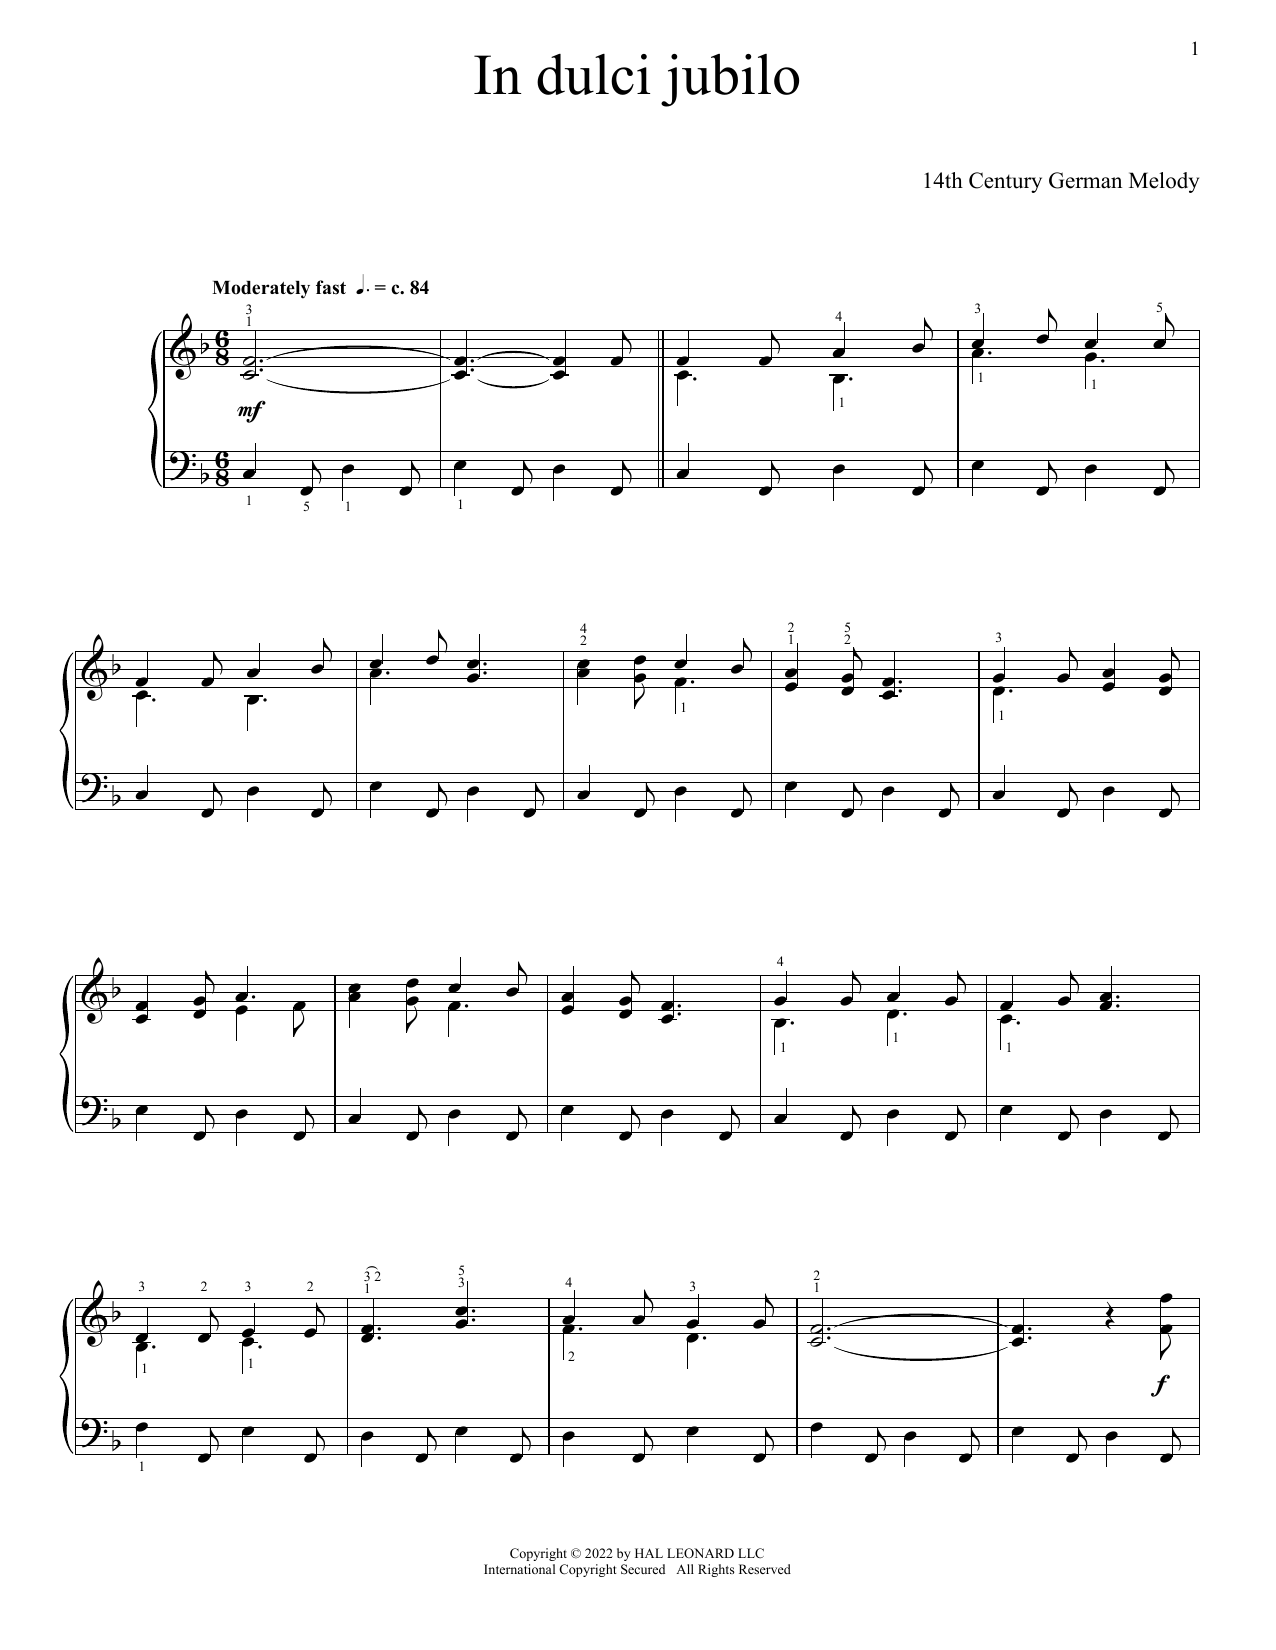 14th Century German Melody In Dulci Jubilo sheet music notes and chords. Download Printable PDF.